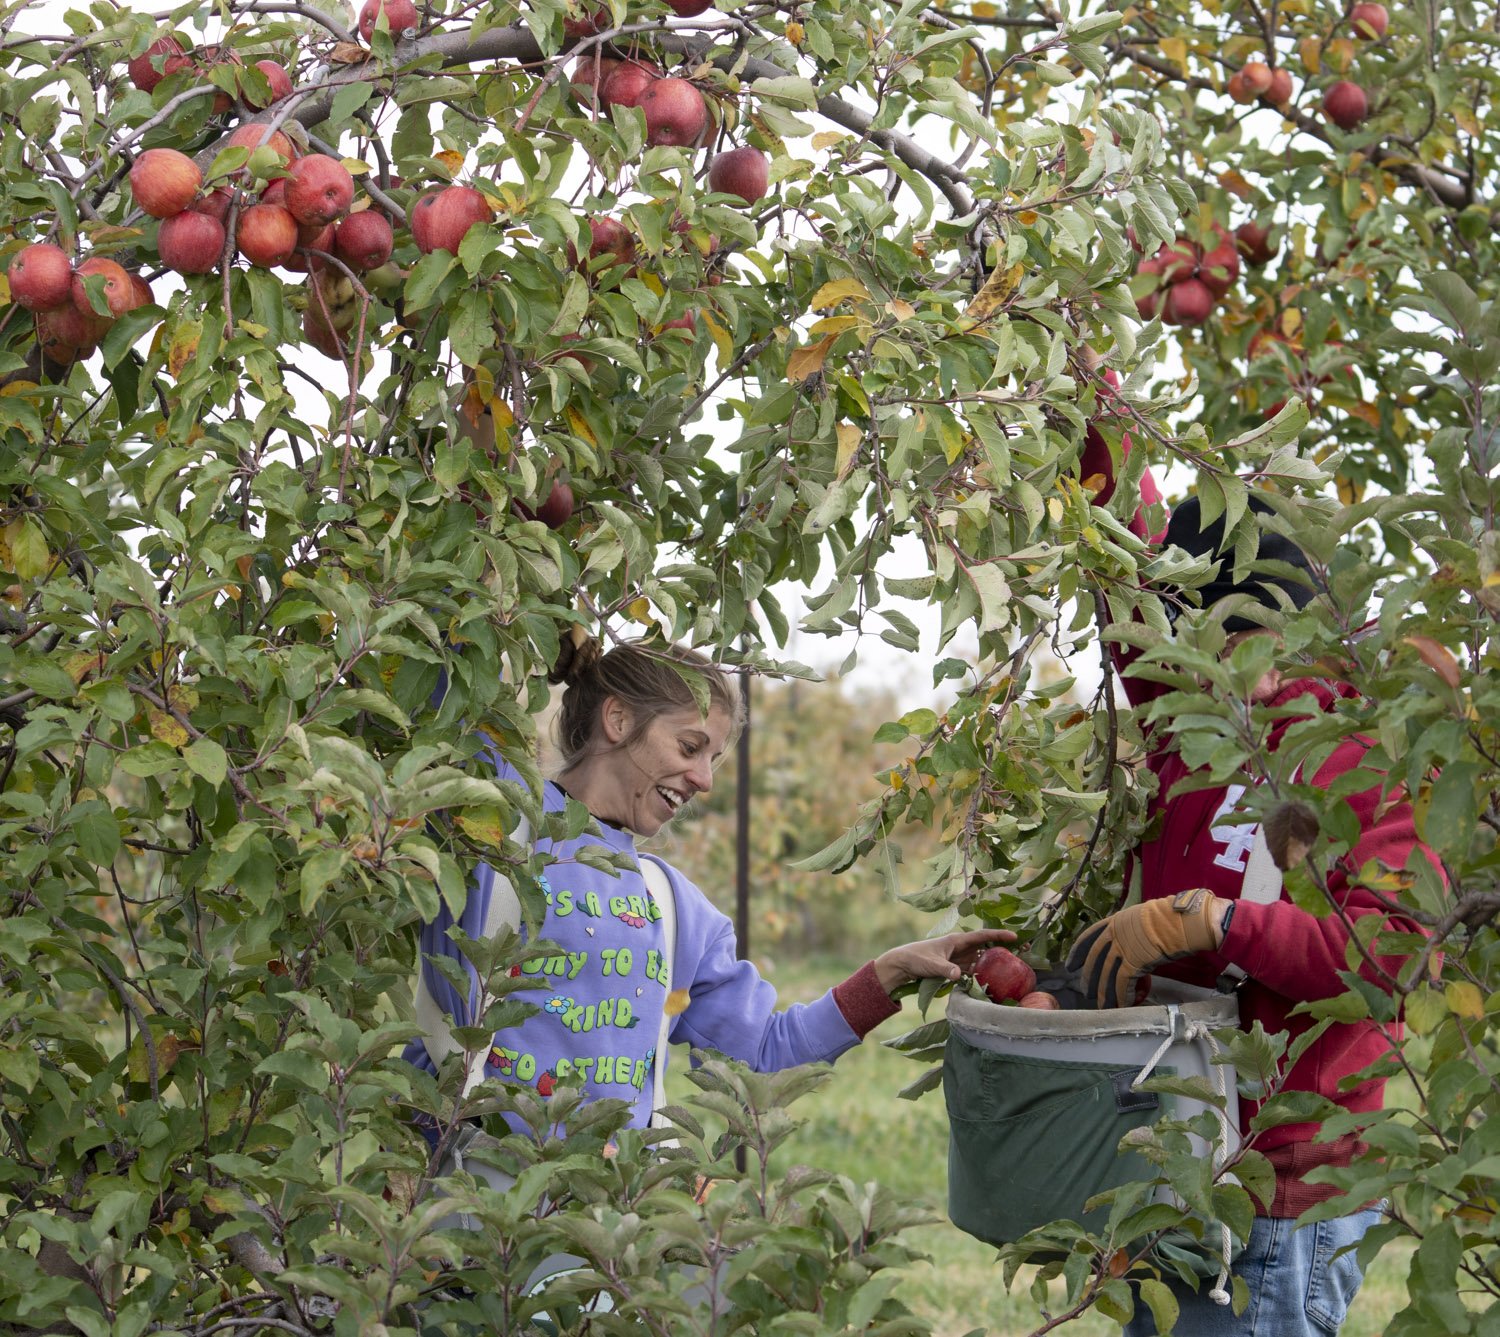  Audra Boarman, program coordinator at Society of St. Andrew’s Indiana office, and volunteer John Shaw glean apples Tuesday, Oct. 31, 2023, at Chandler’s Orchard &amp; Country Store in Fillmore, Ind. That day the gleaners rescued 54 bushels of apples